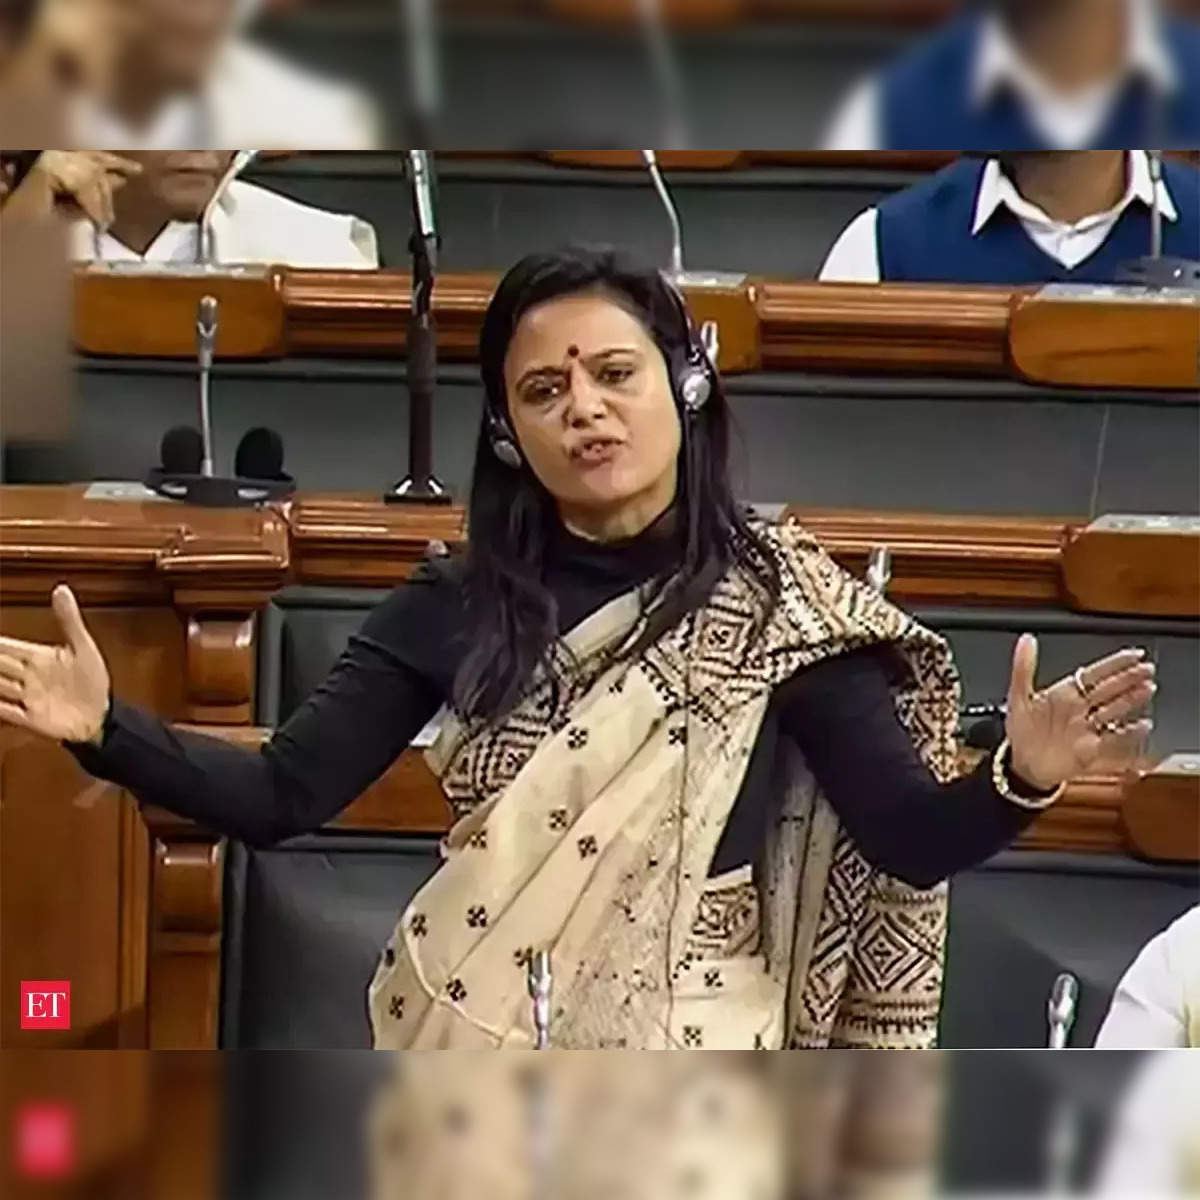 Look at her closely! You won't see her in Lok Sabha after today! She is @MahuaMoitra ....a Gold-digger from TMC! She is LOSING today from Krishnanagar constituency by atleast 1+ Lakh Votes! Wish her best retirement time with Lot of EGGS to keep herself energized. Even…